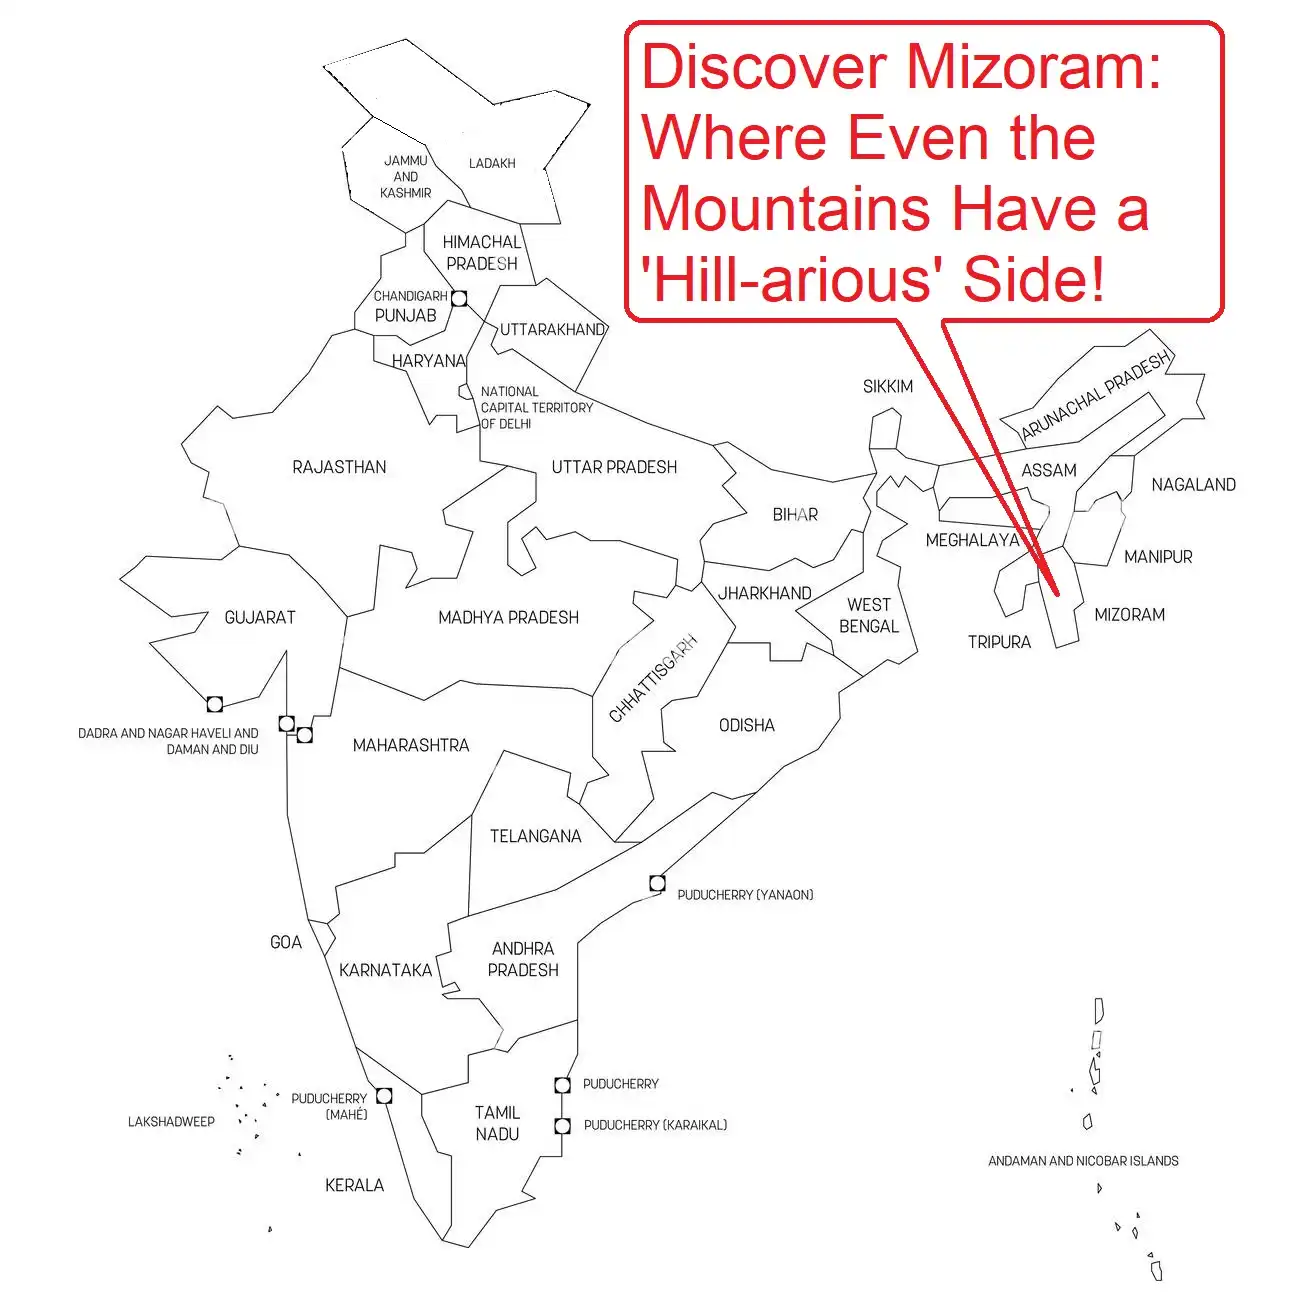 Mizoram: A Journey Through the Land of the Hill People